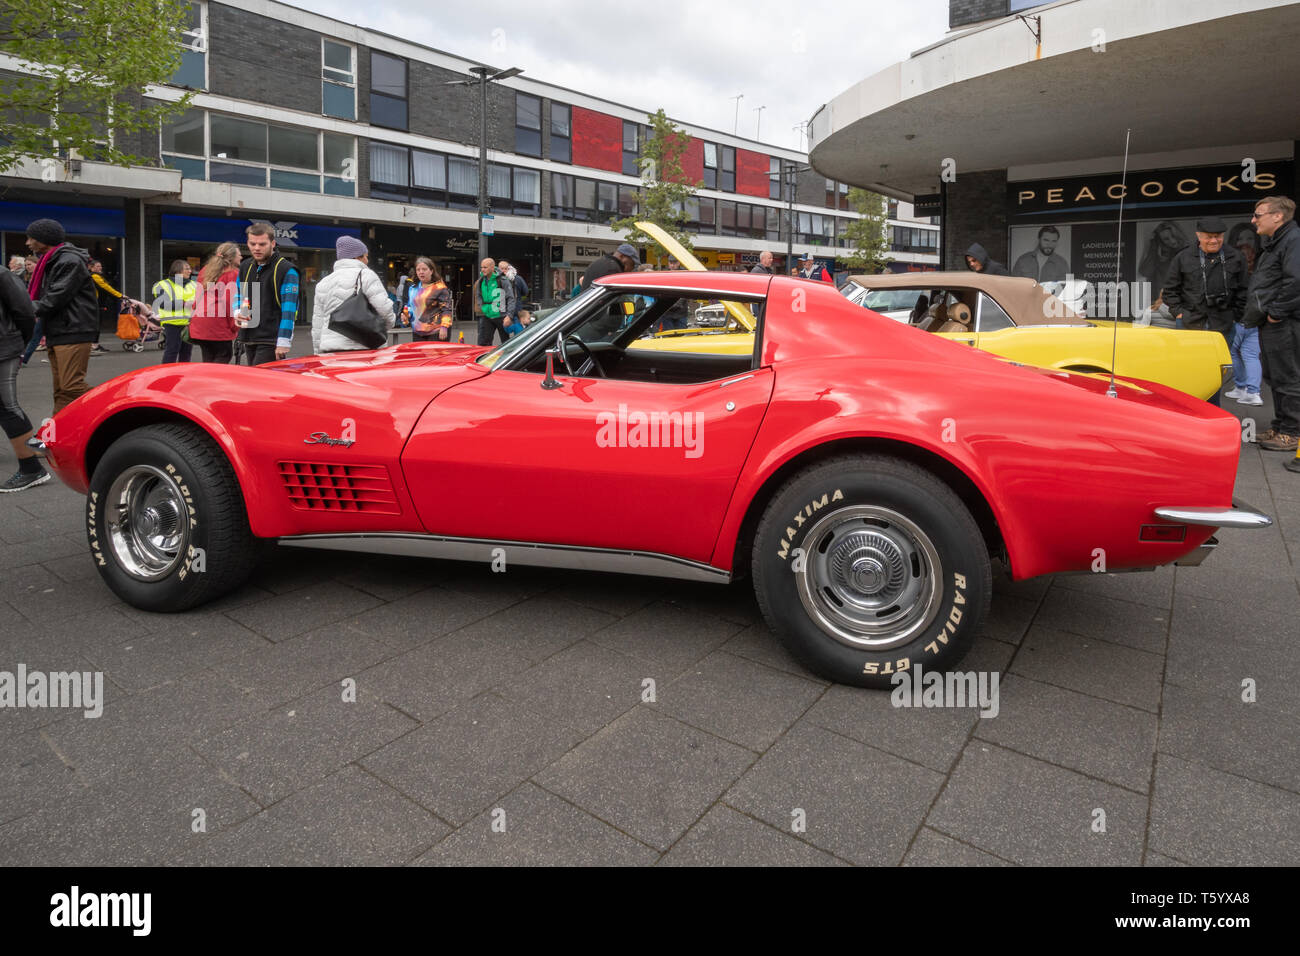 Red 1971 Ford Chevrolet GMC Corvette at a classic motor vehicle show in the UK Stock Photo